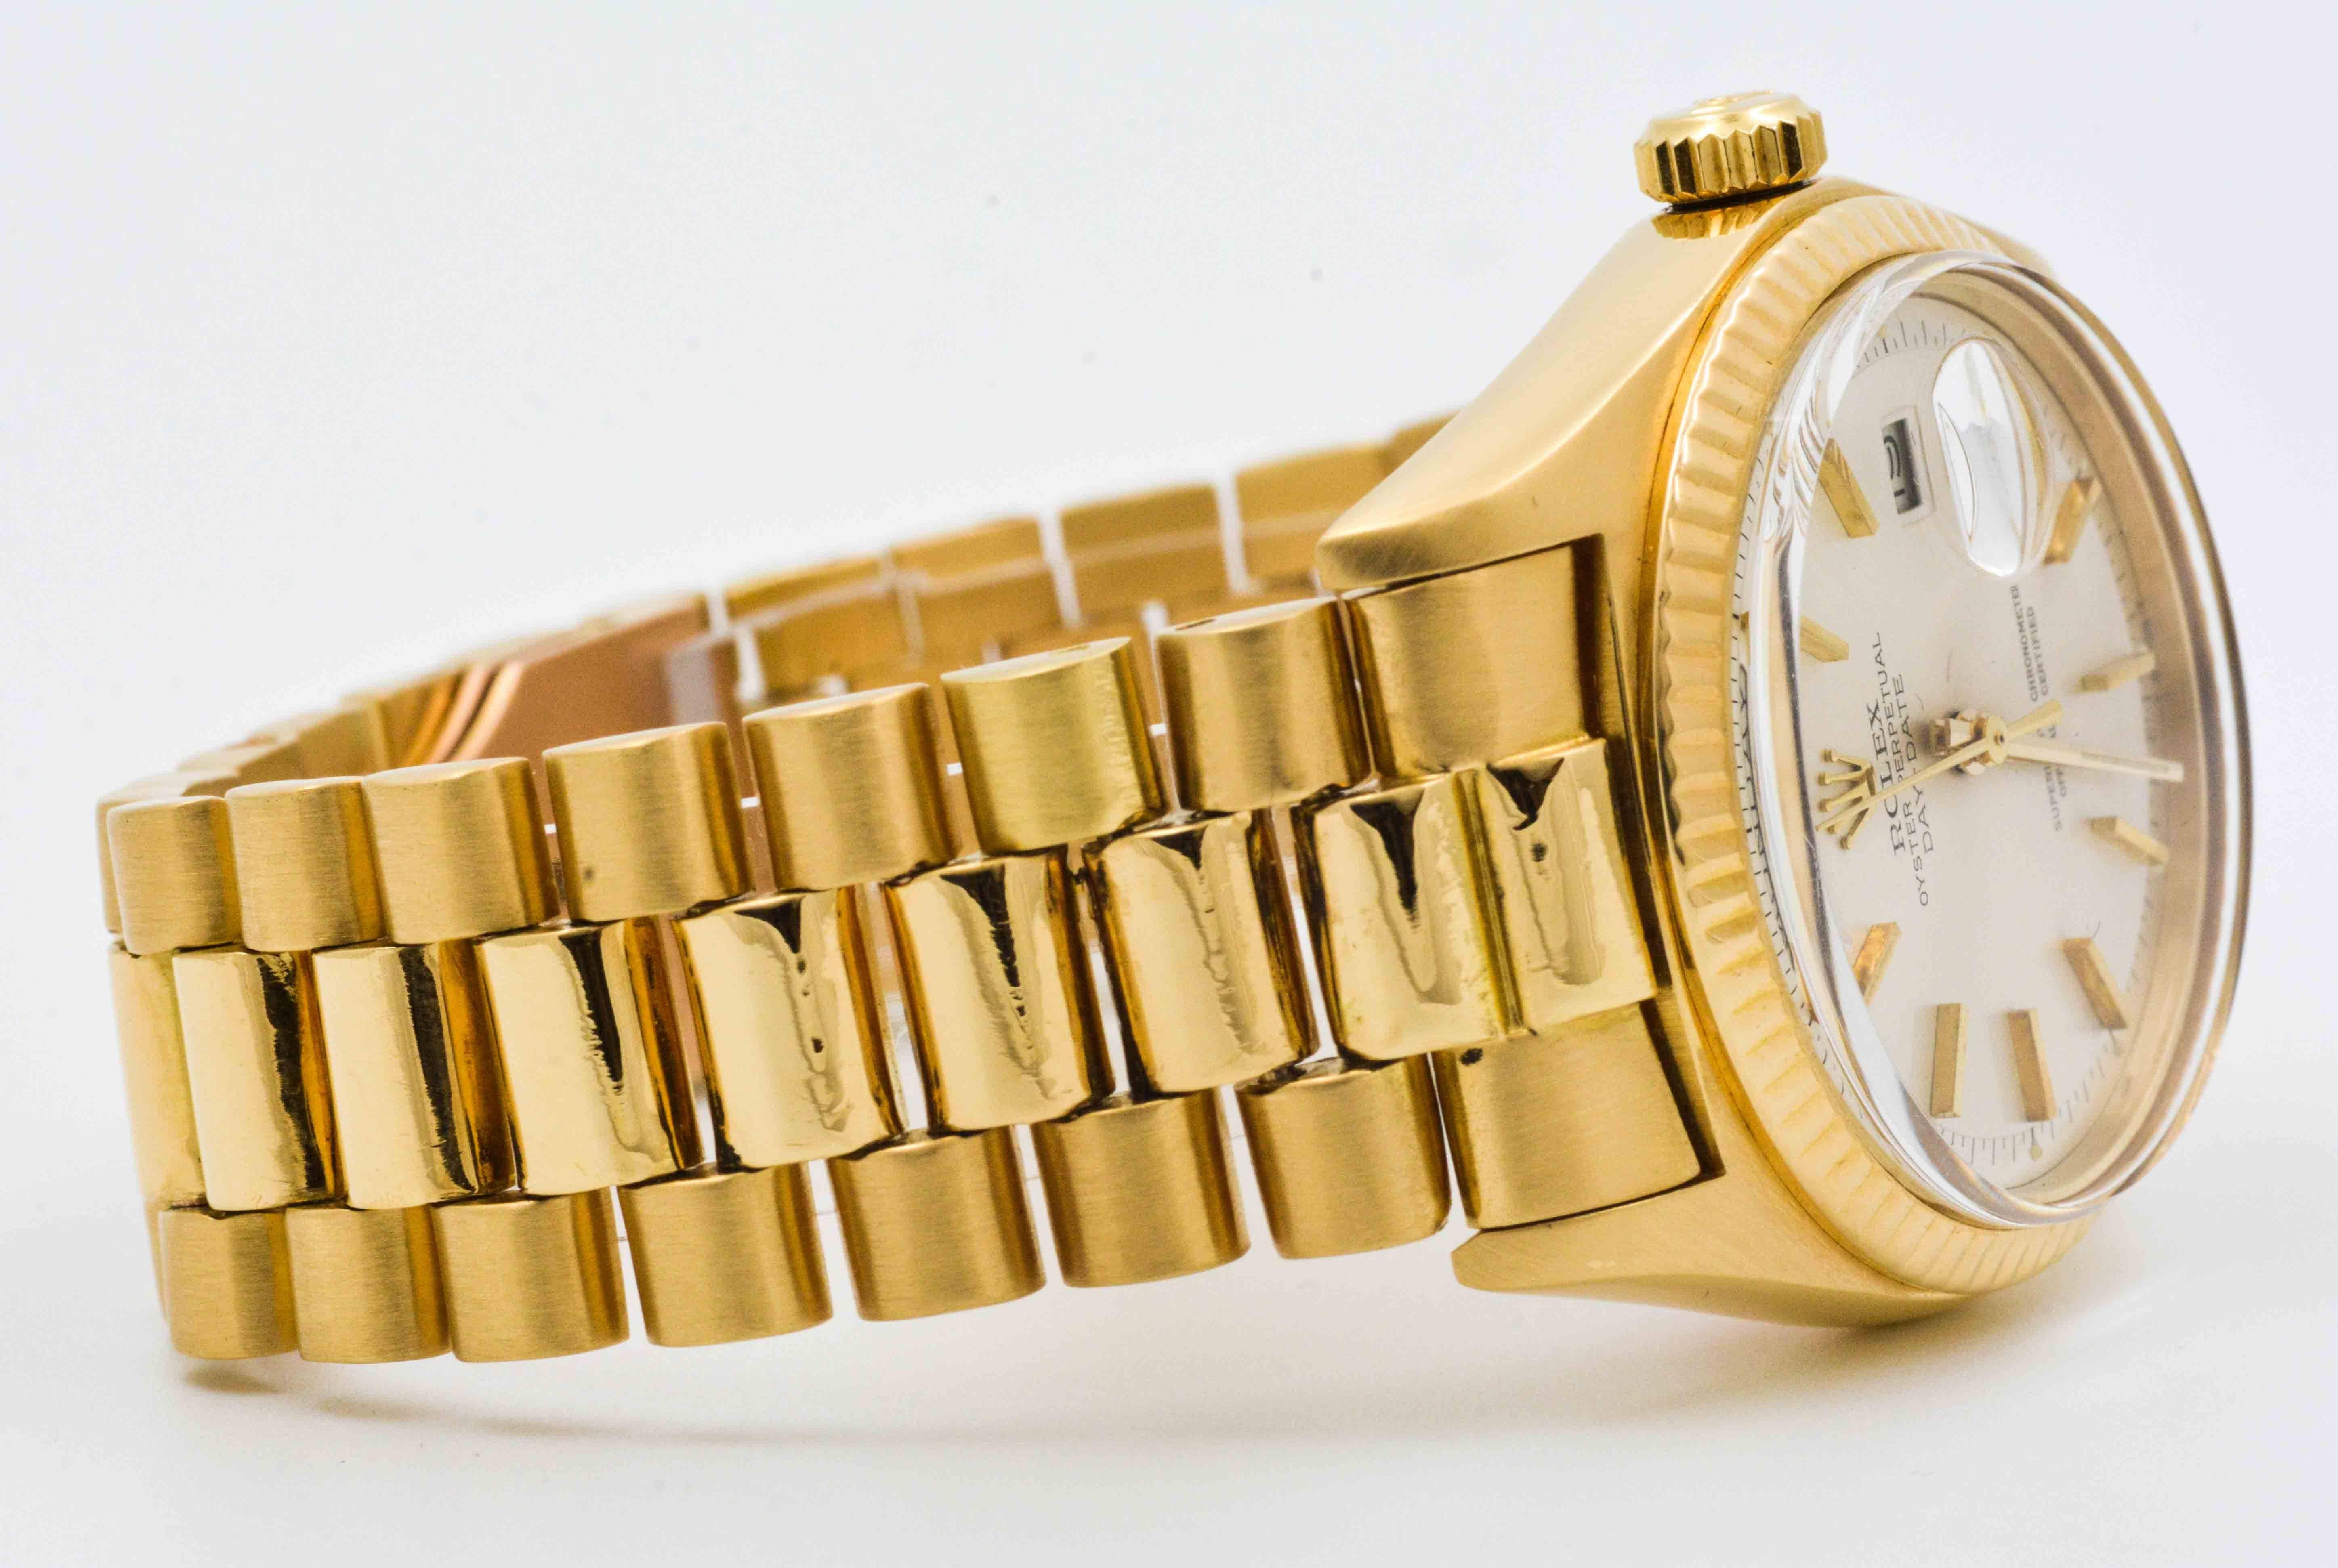 Continuing to be the watch par excellence of influential people, this 18kt yellow gold Rolex Day Date will certainly set you apart. Stylish, functional and versatile, this 18kt yellow gold watch is 36 mm with sterling silver stick dial, yellow gold